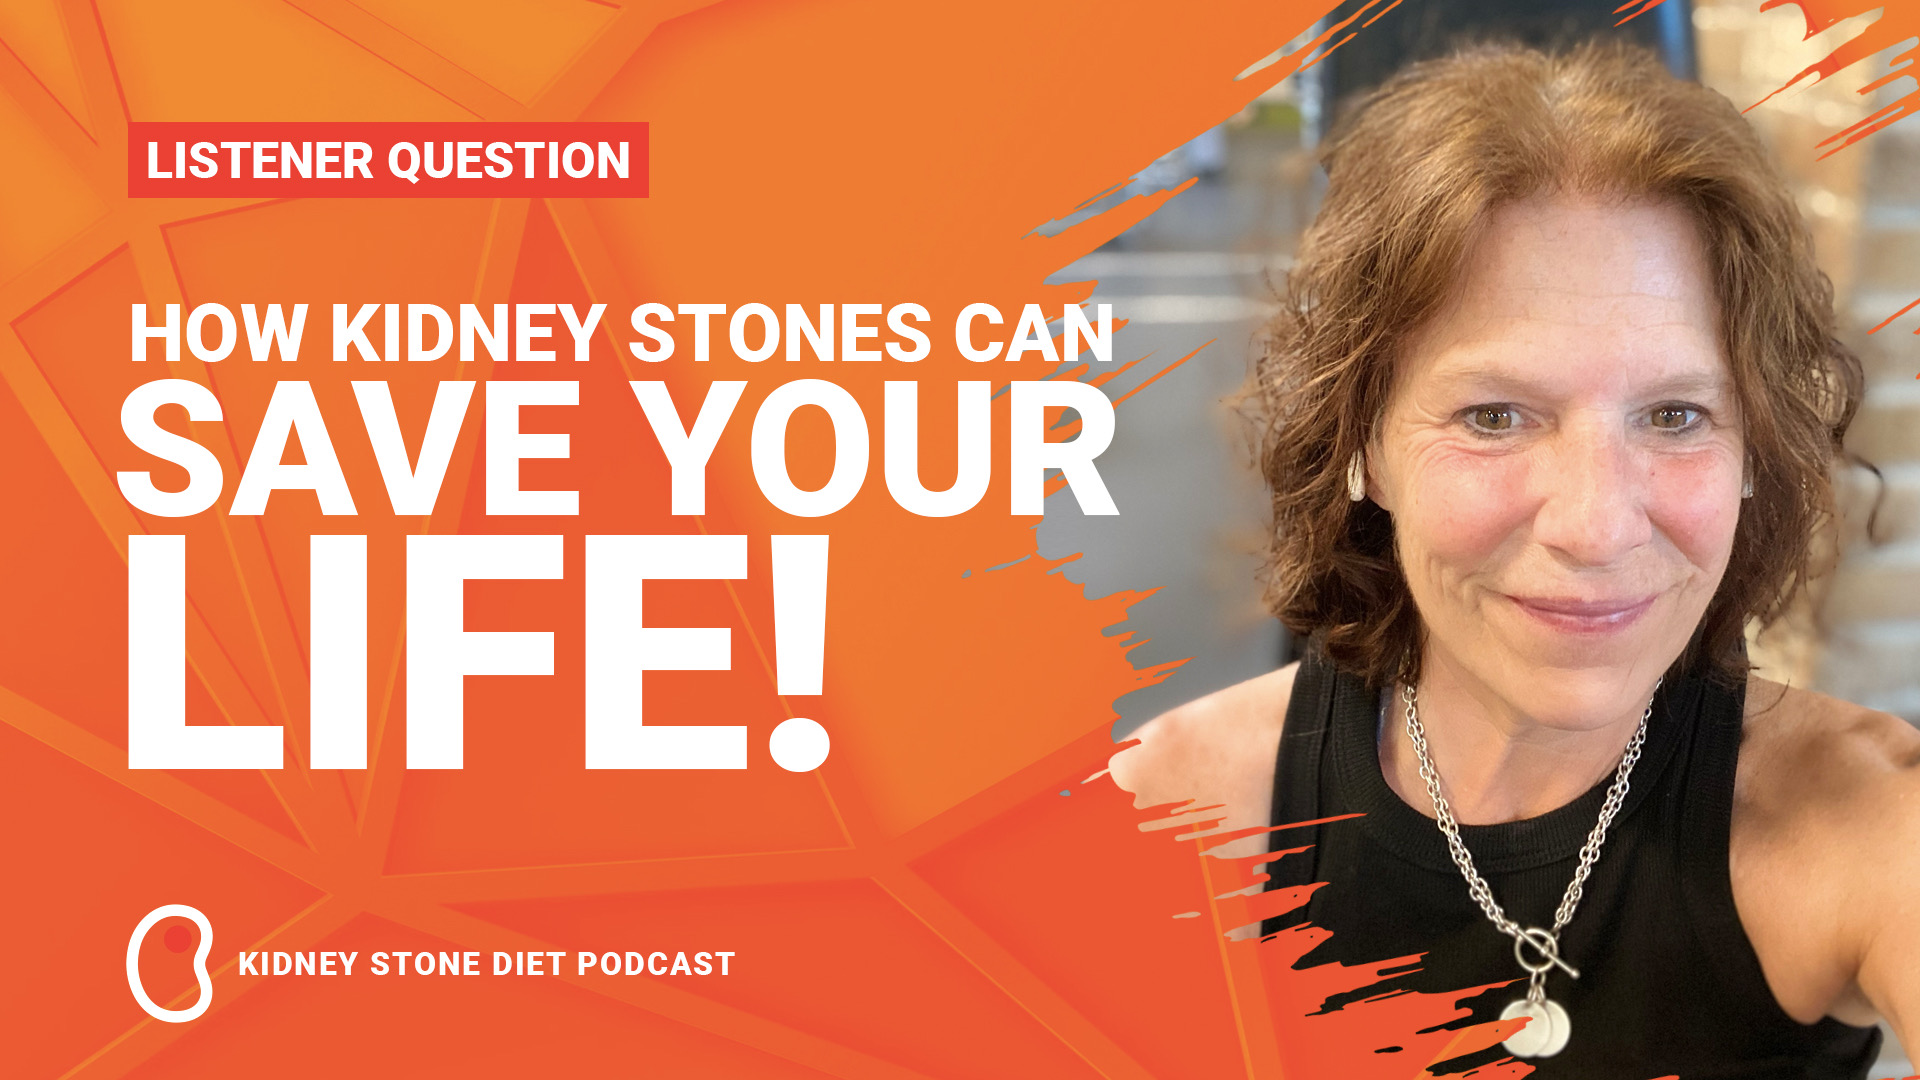 How kidney stones can save your life